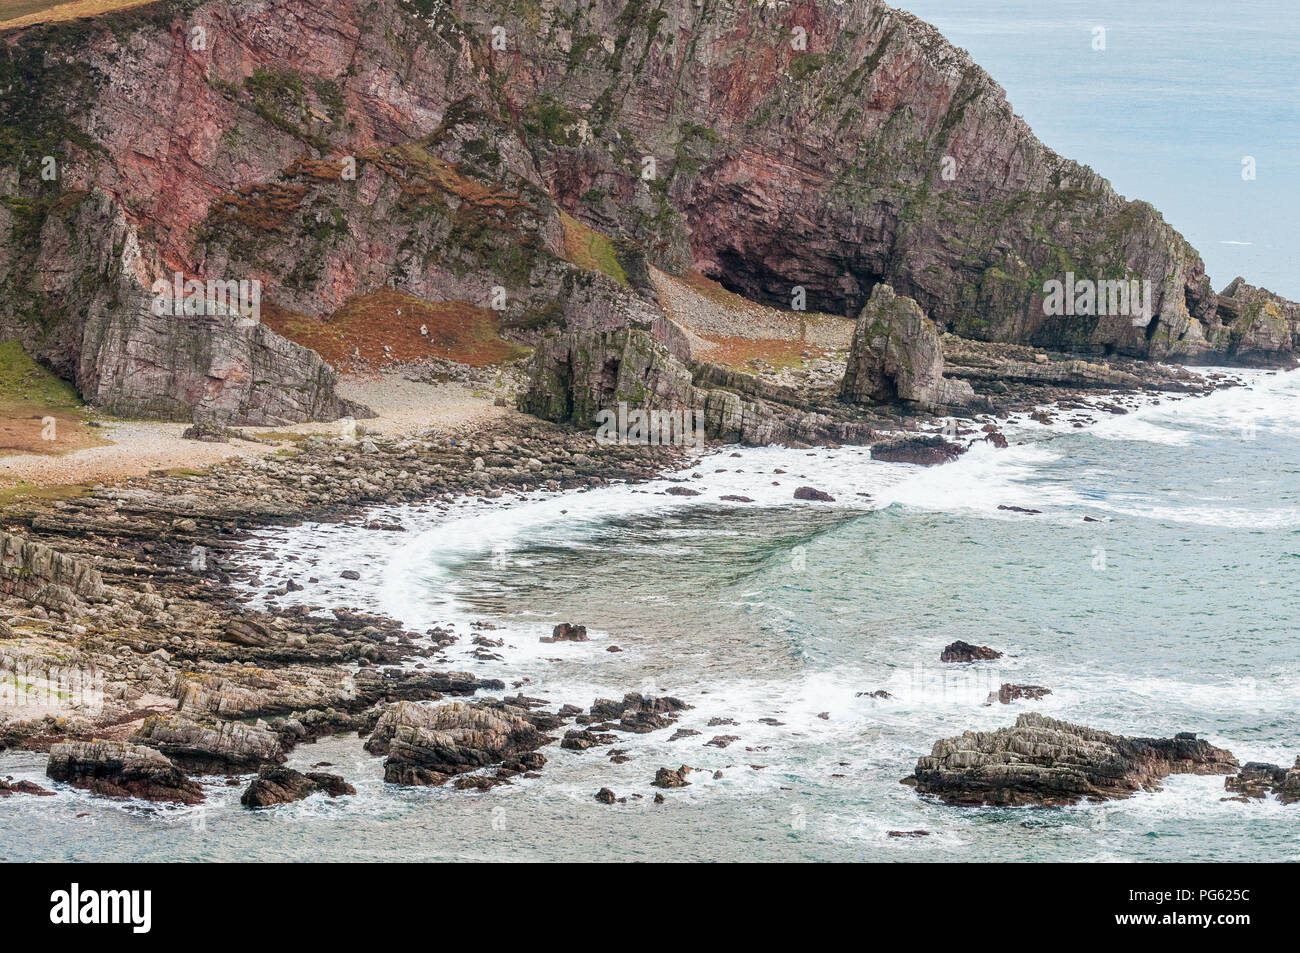 A rocky shoreline with red rock cliffs in the background Stock Photo